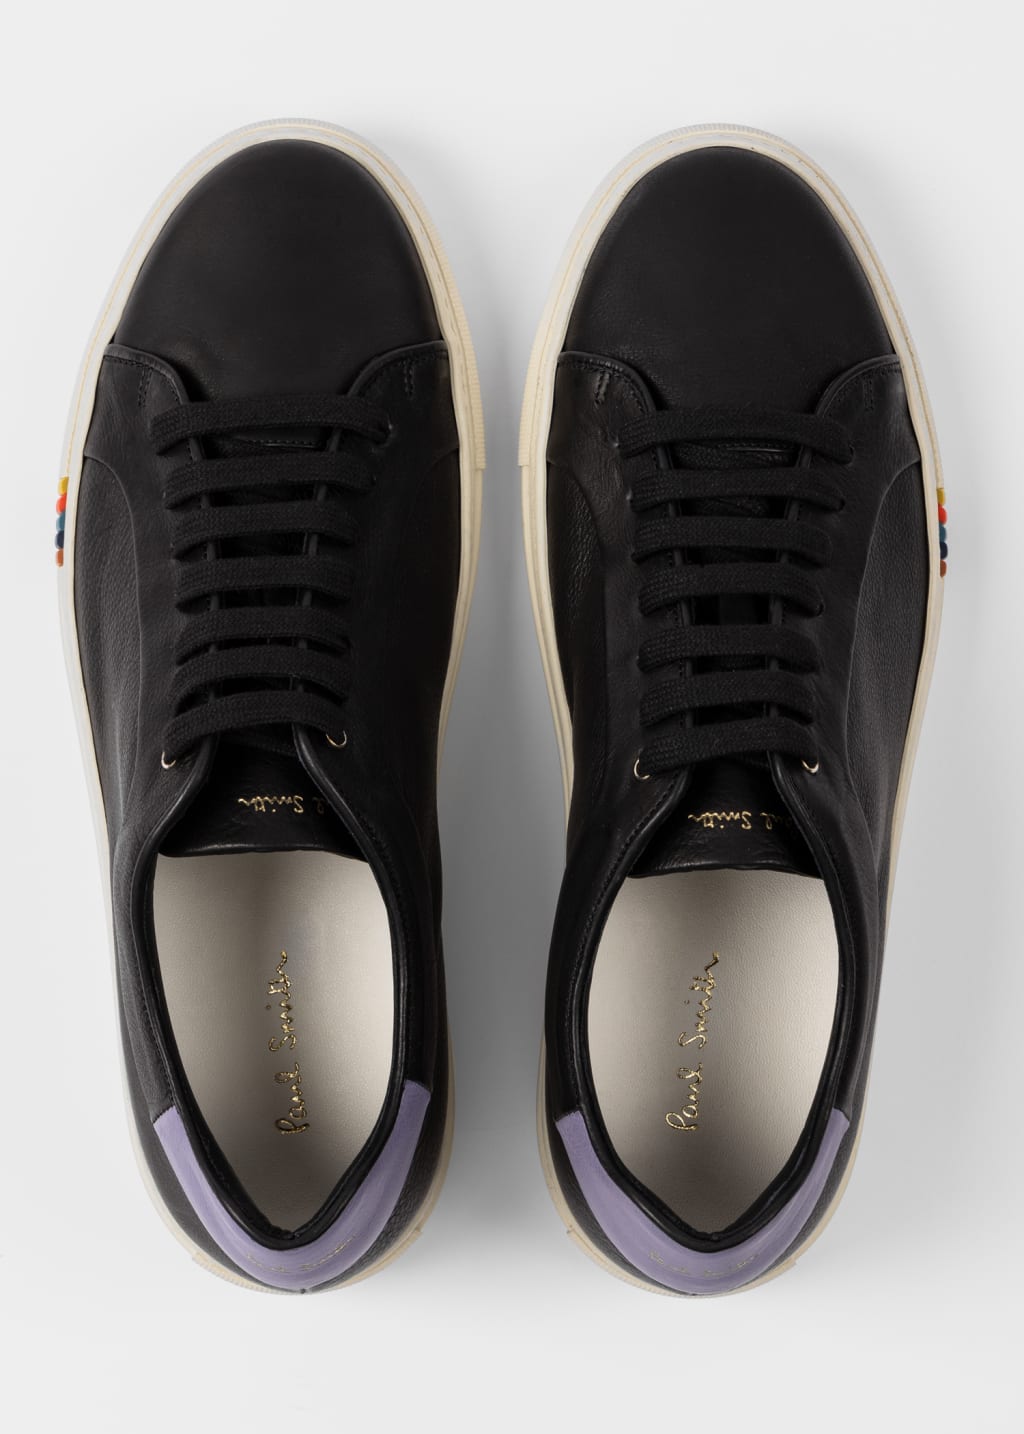 Pair View - Black Leather 'Basso' Trainers With Purple Trim Paul Smith